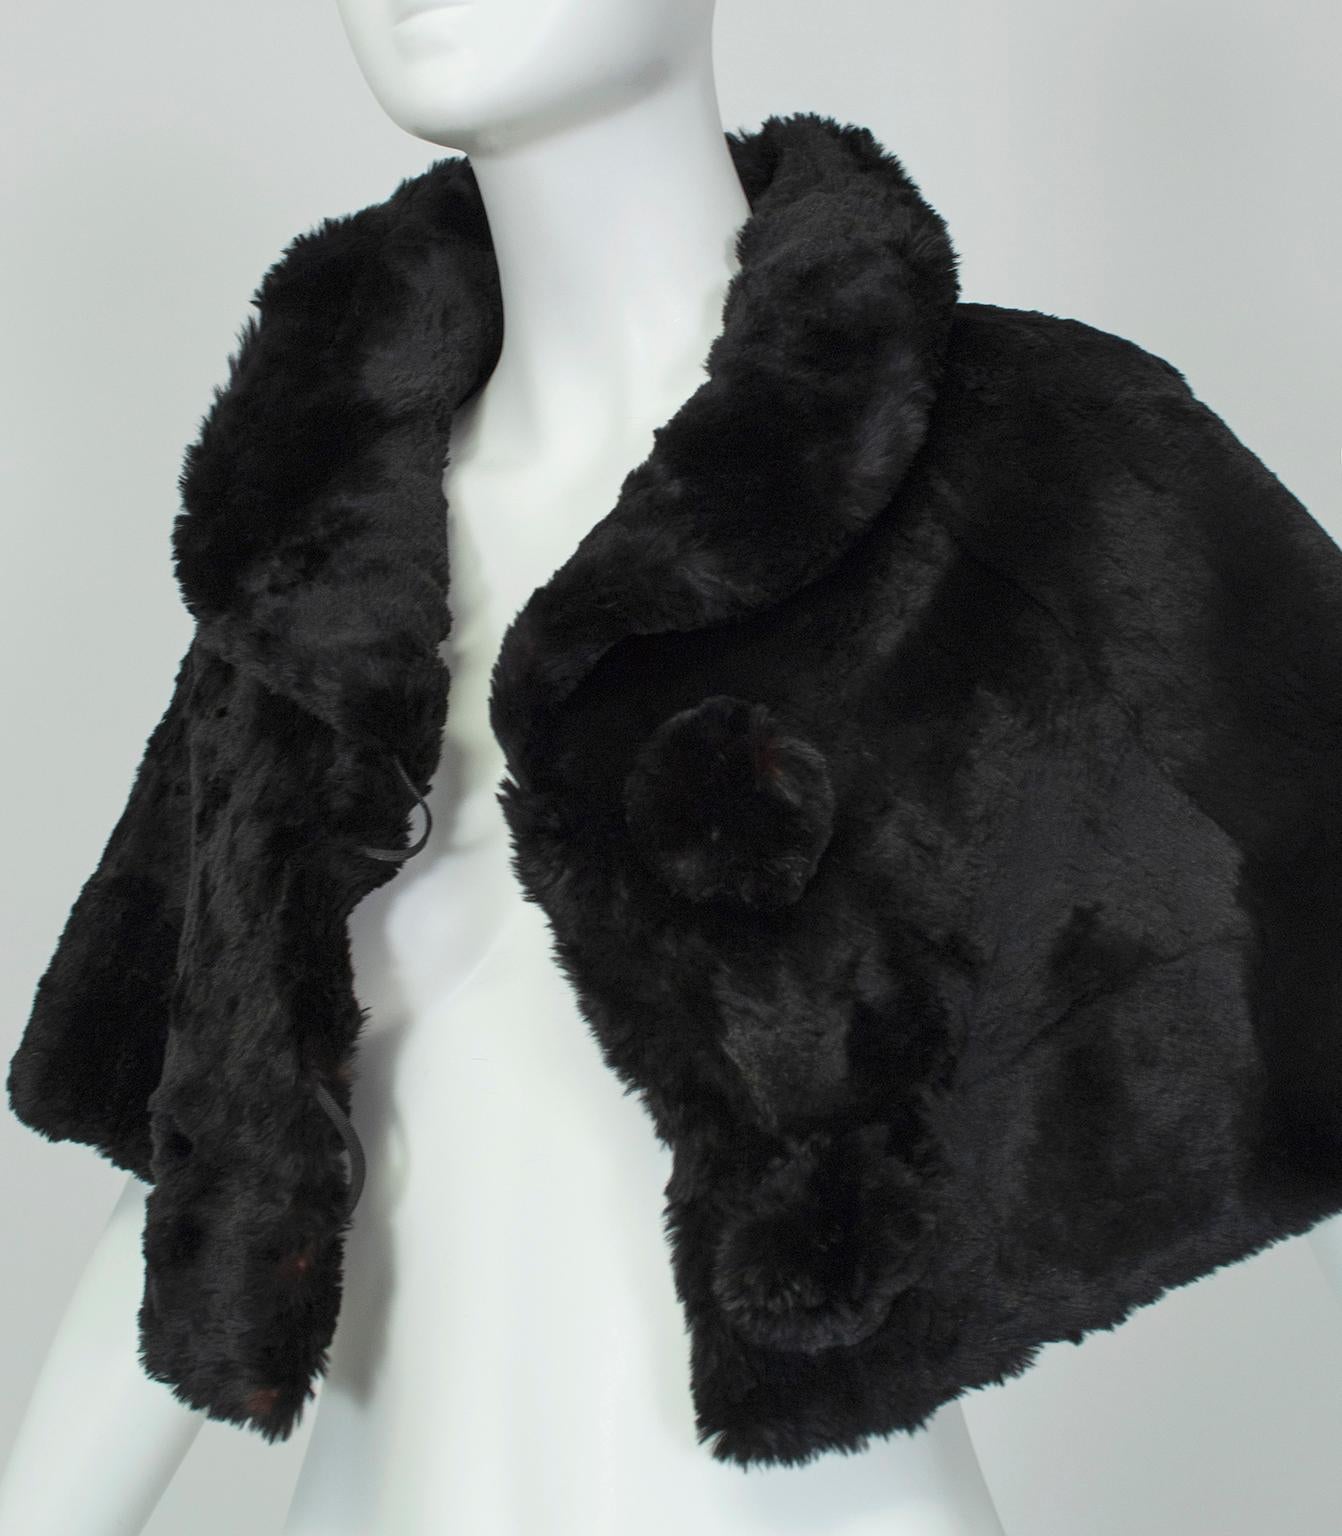 Black Shearling Capelet Stole with Shawl Collar, 1950s 1